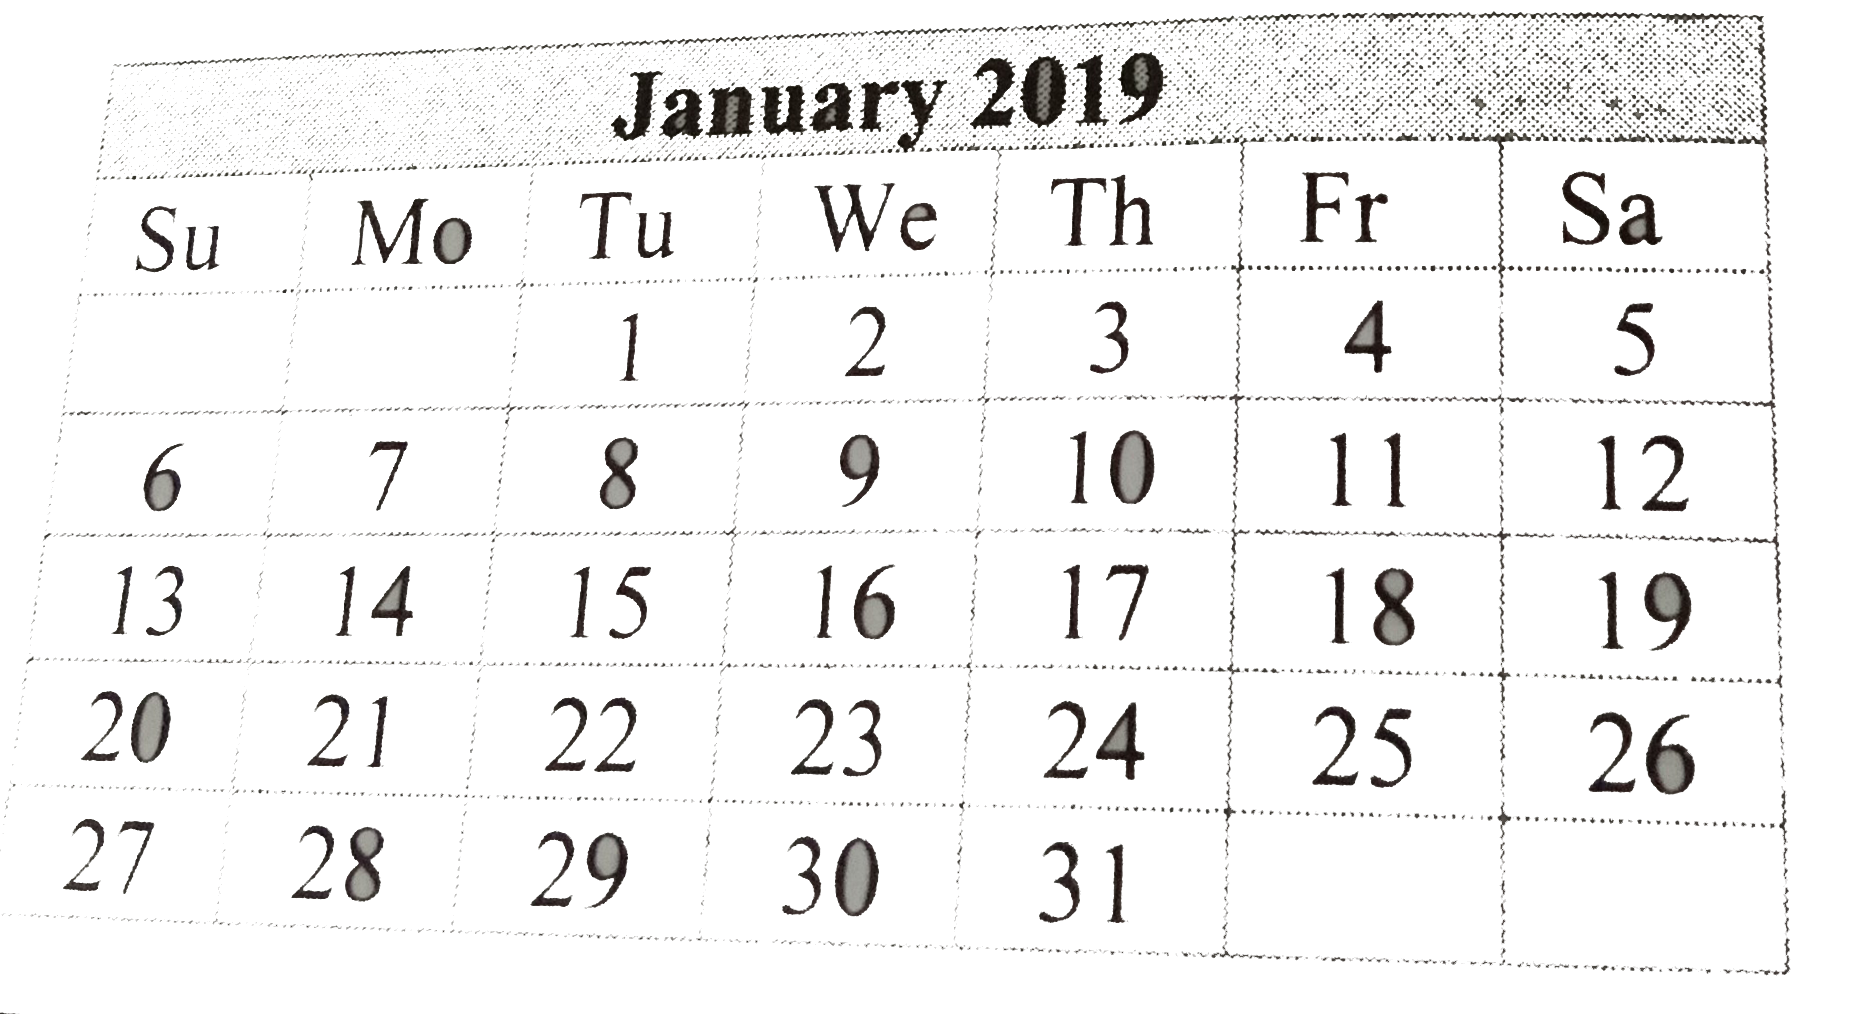 In the month of  January  2019, find the days on which the date is a multiple of 6.